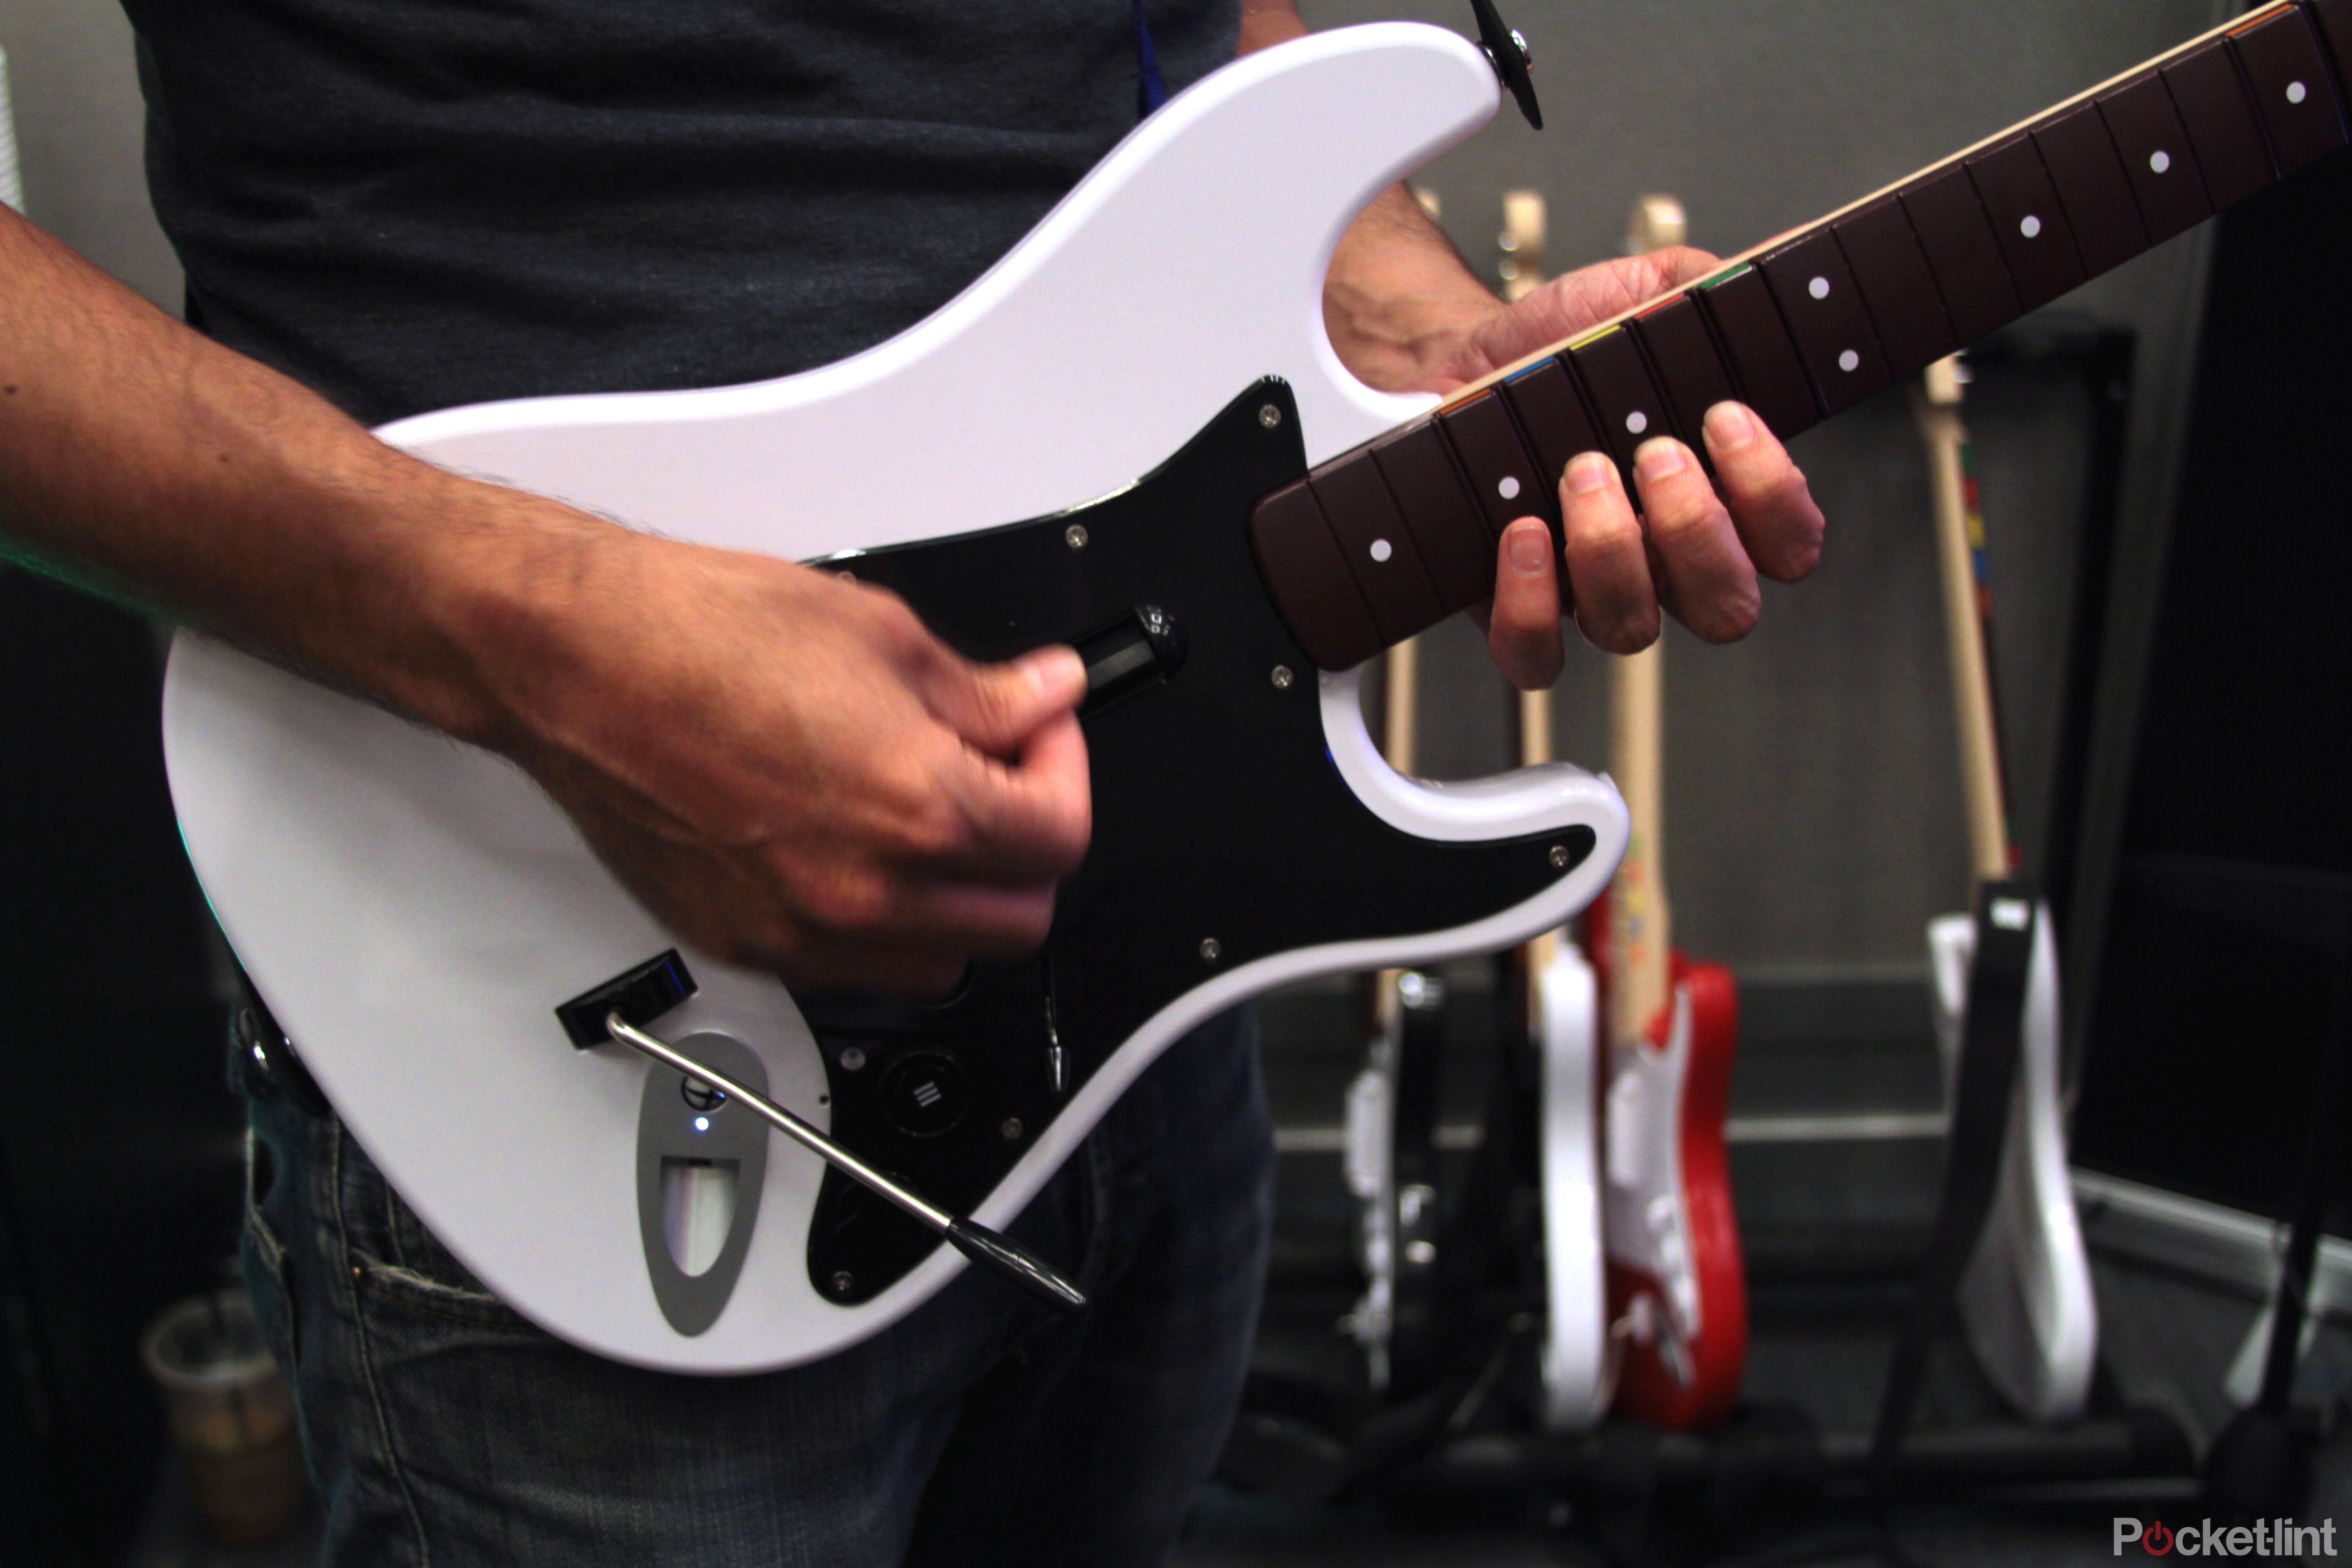 rock band 4 preview freestyle guitar solos and the new mad catz controllers hands on image 4